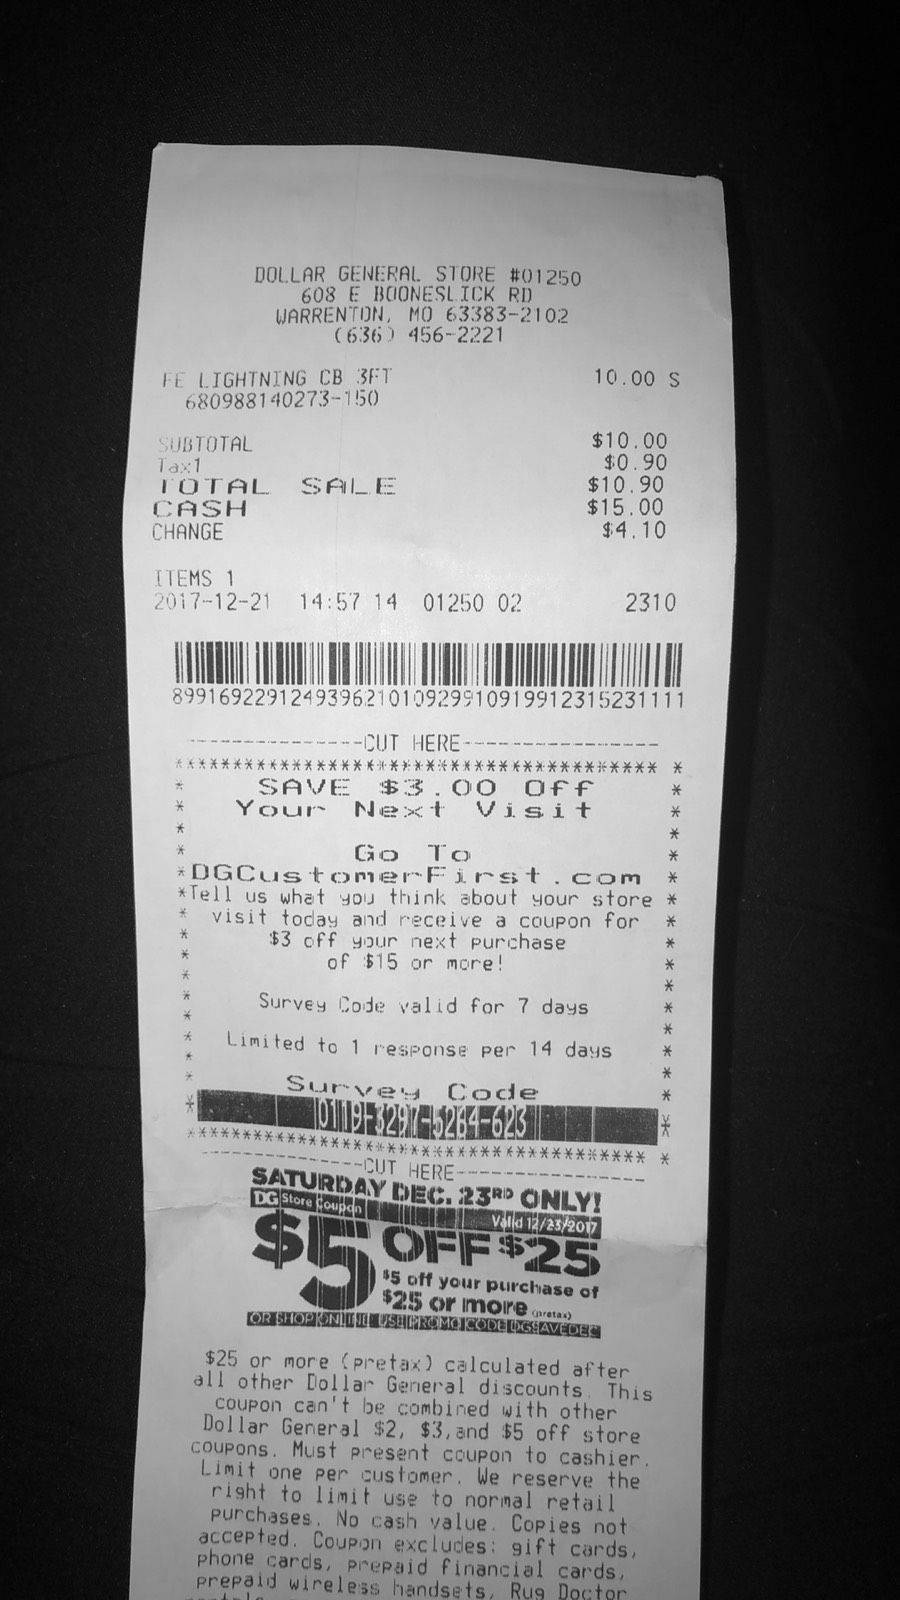 Dollar General Store Receipt Picture